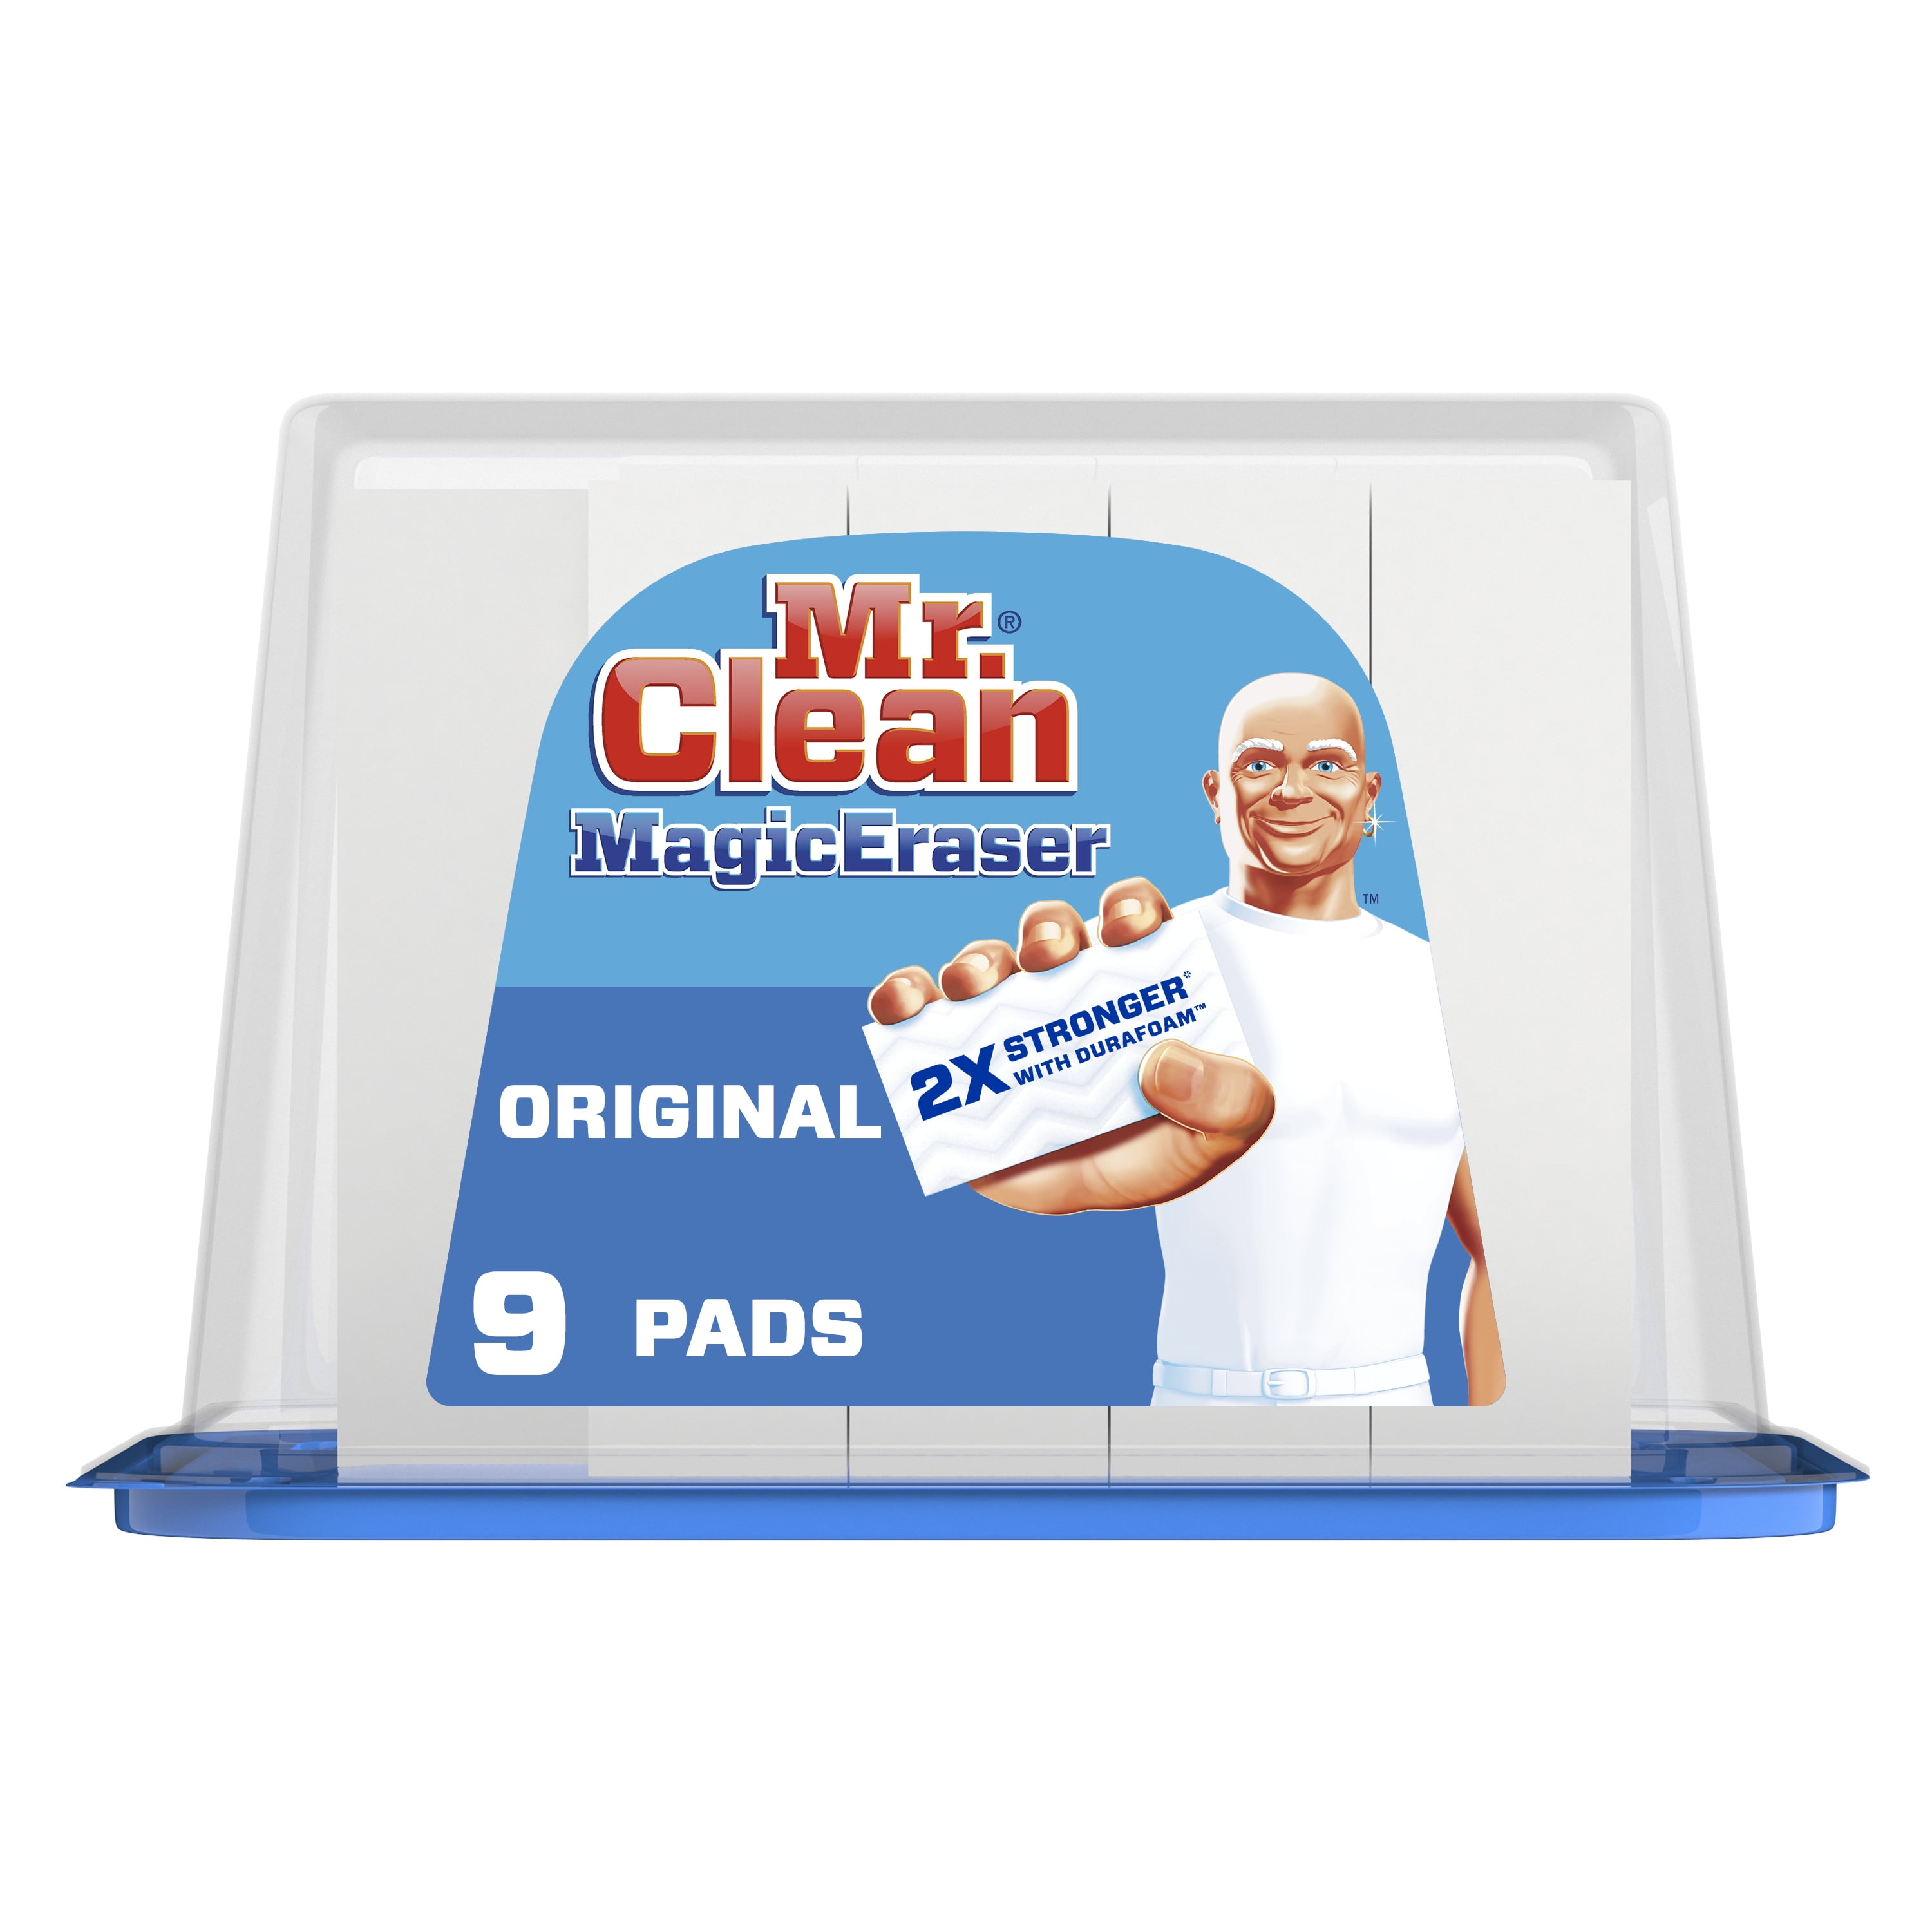 Mr Clean Household Cleaning Pads, Original, Magic Eraser - 9 pads